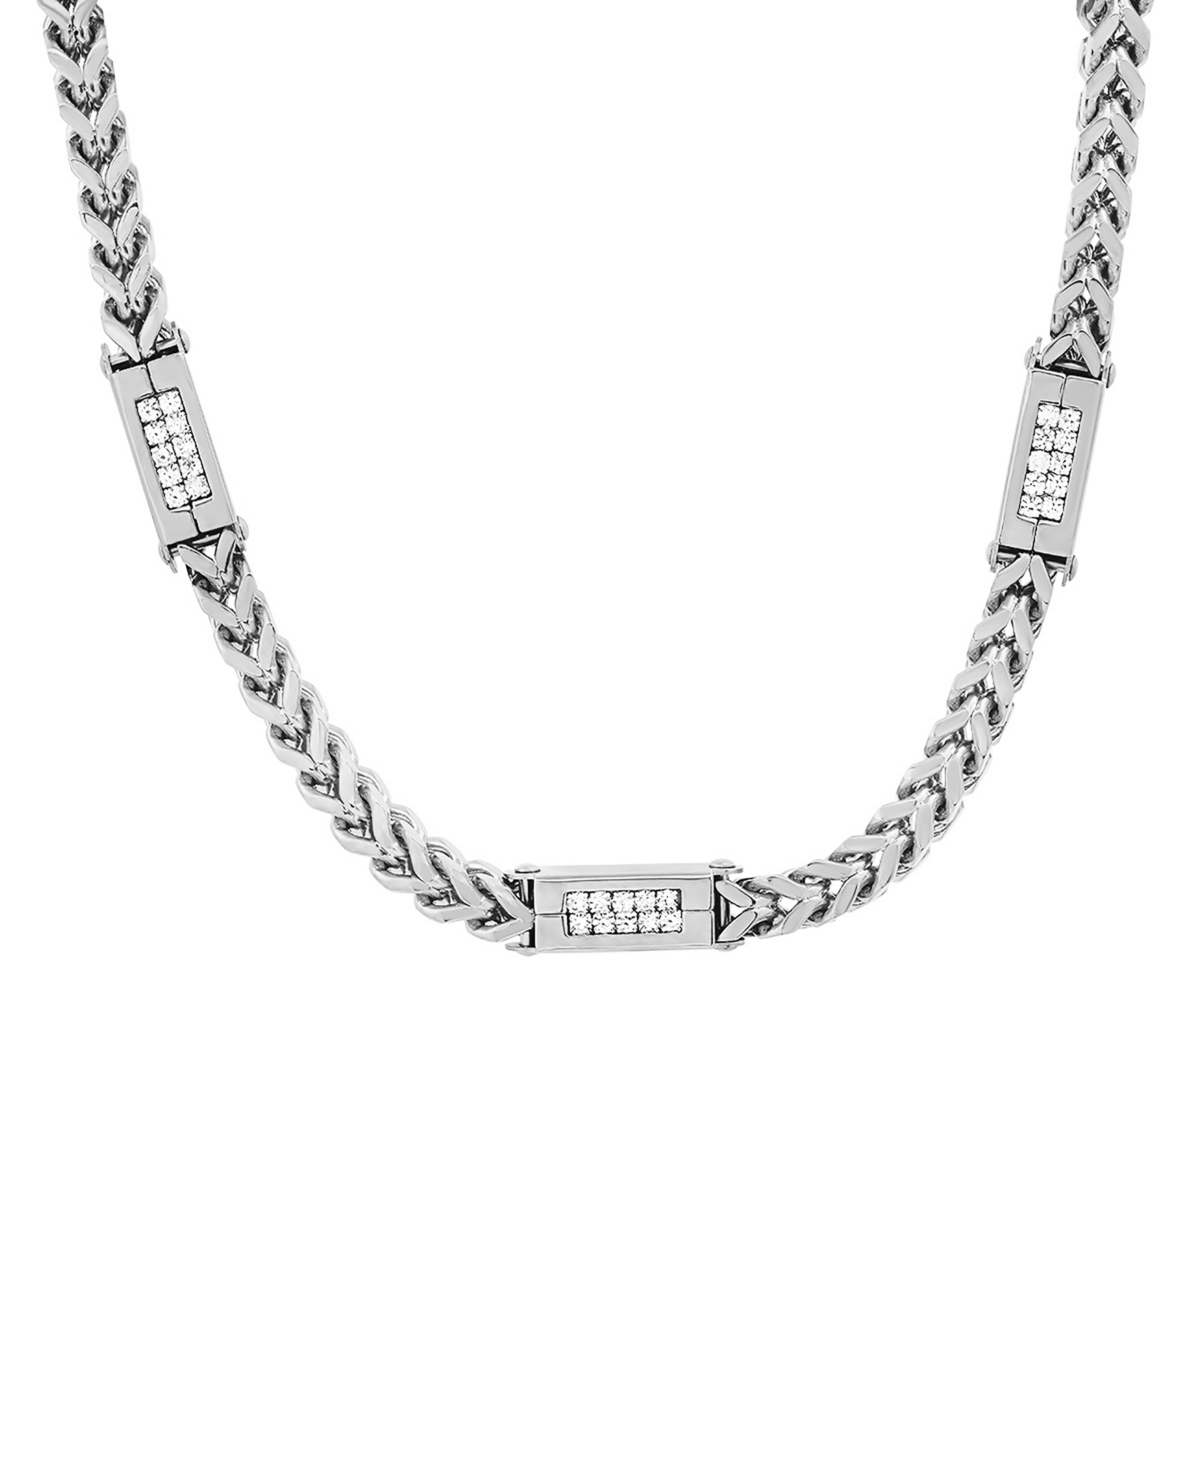 Men's Stainless Steel Wheat Chain and Simulated Diamonds Link Necklace - Silver-tone